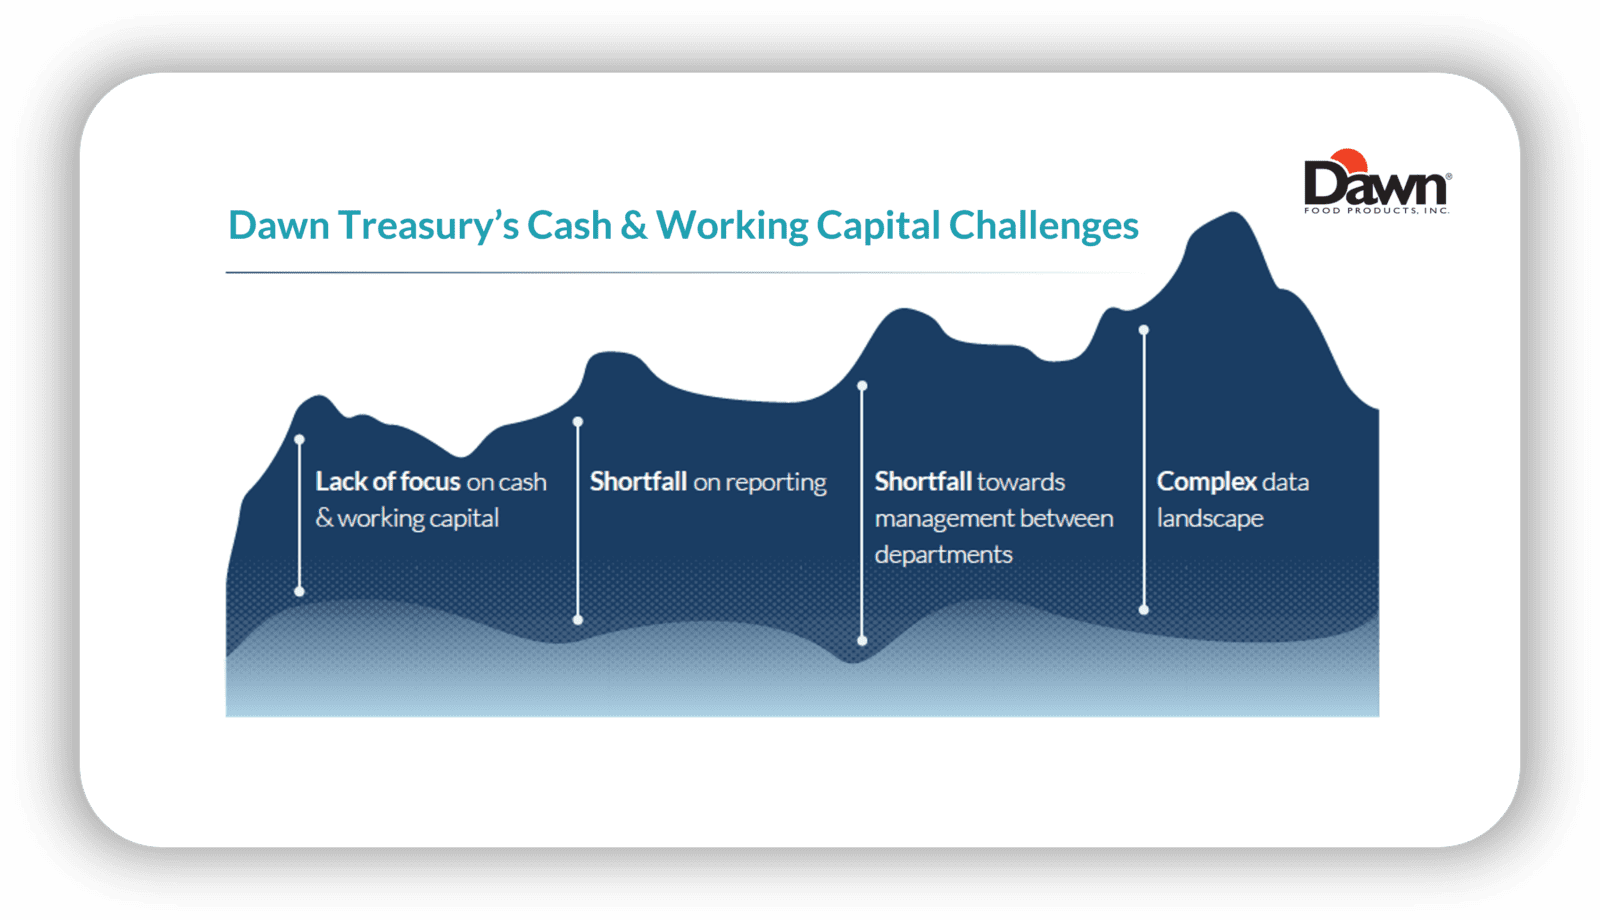 The primary cash forecasting and working capital challenges impacting the Dawn Foods treasury team. 